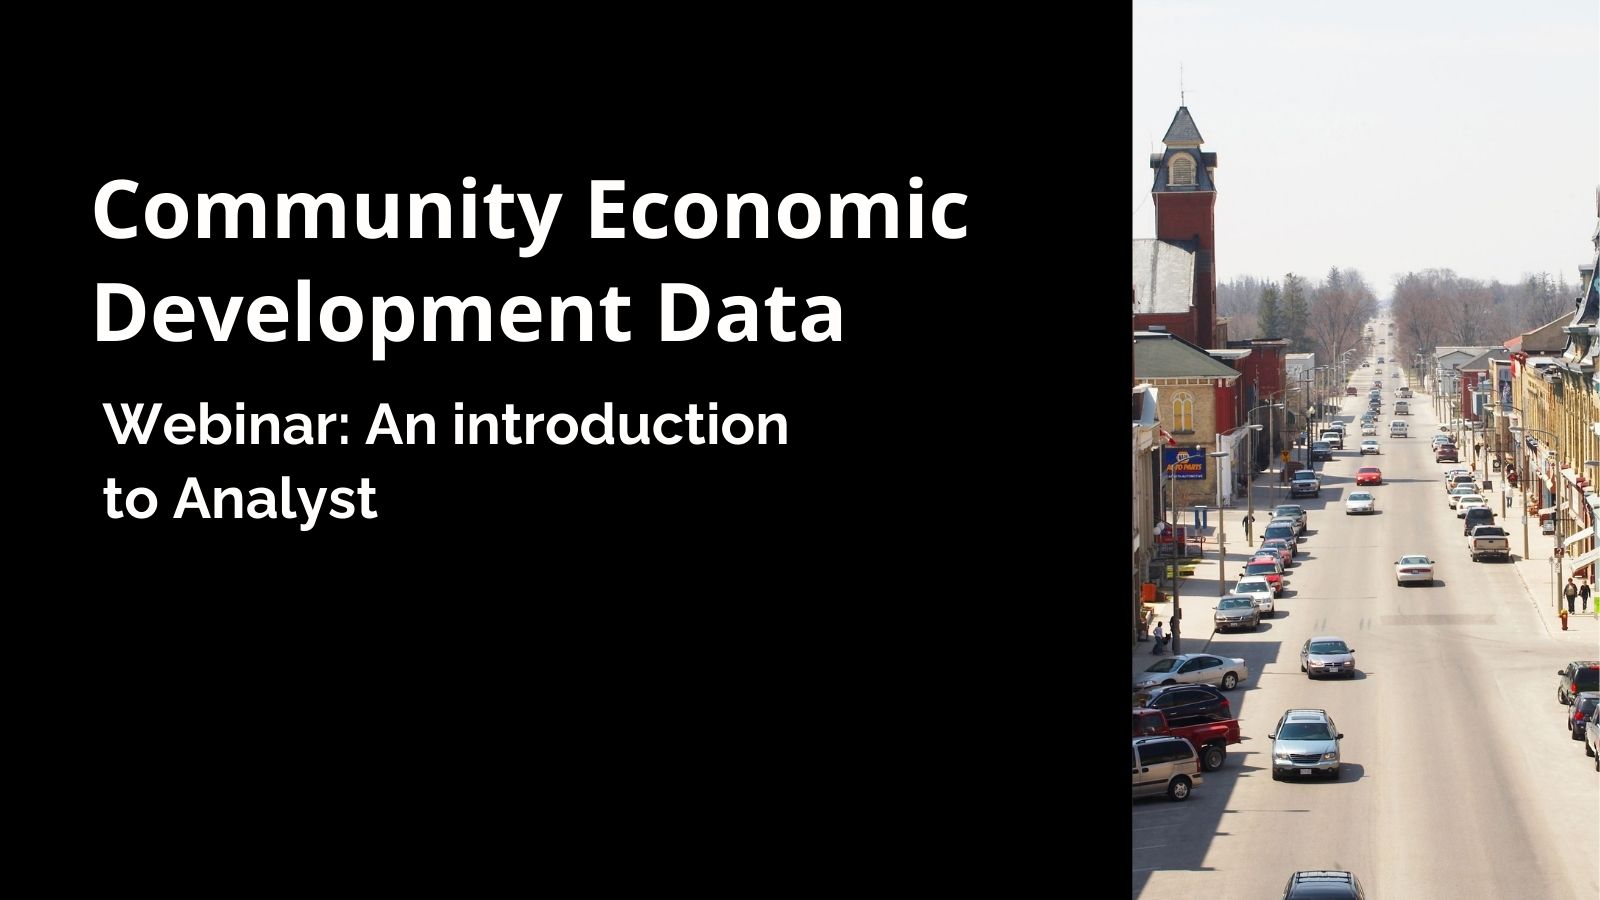 Community Economic Data – An Introduction to Analyst 